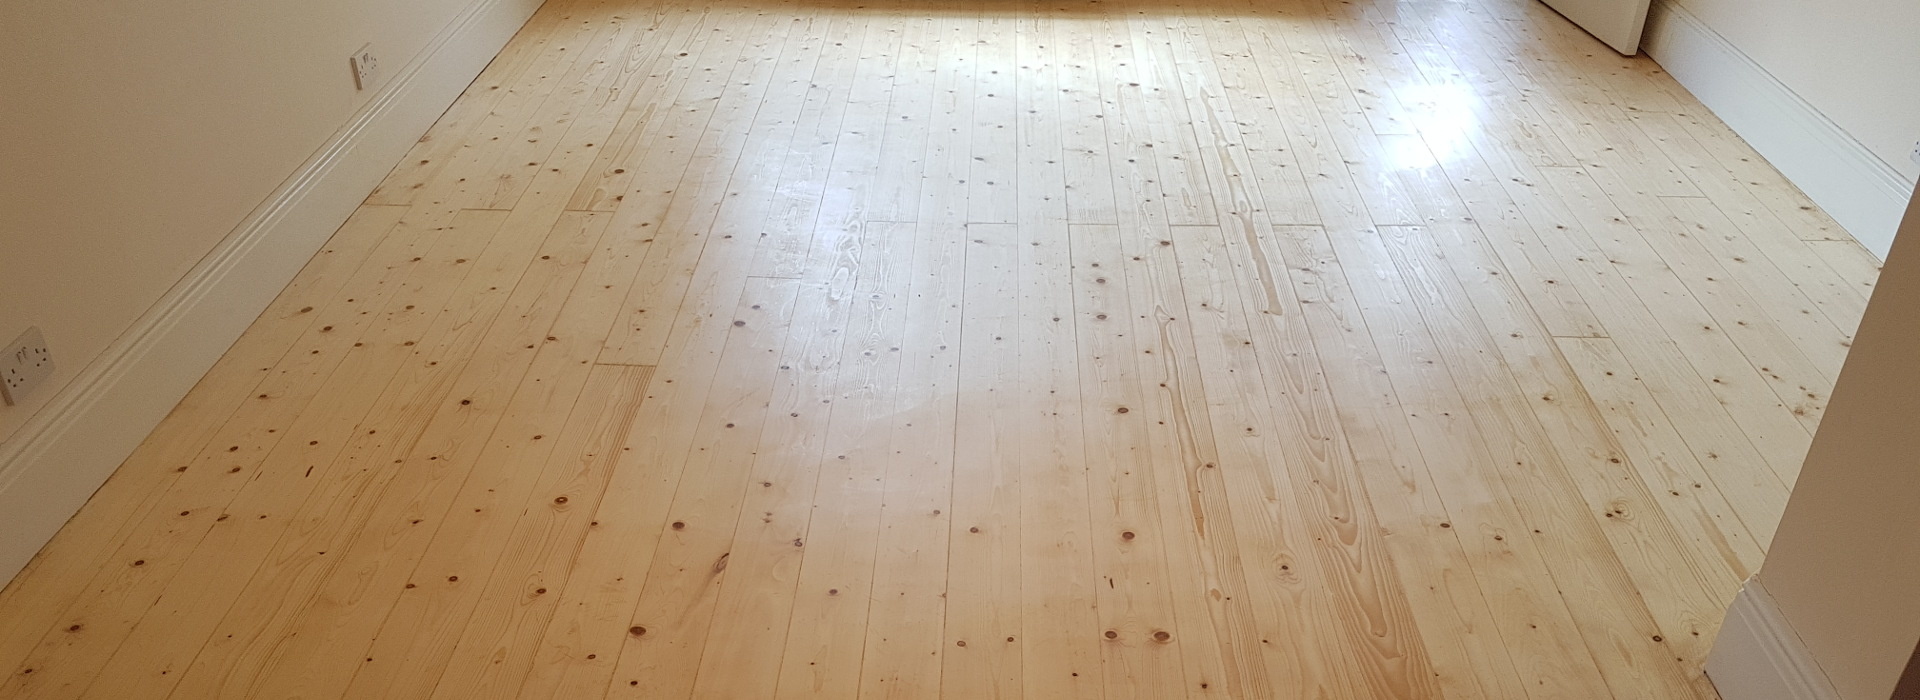 With the Floor sanding you can save up to 70% of new wood flooring